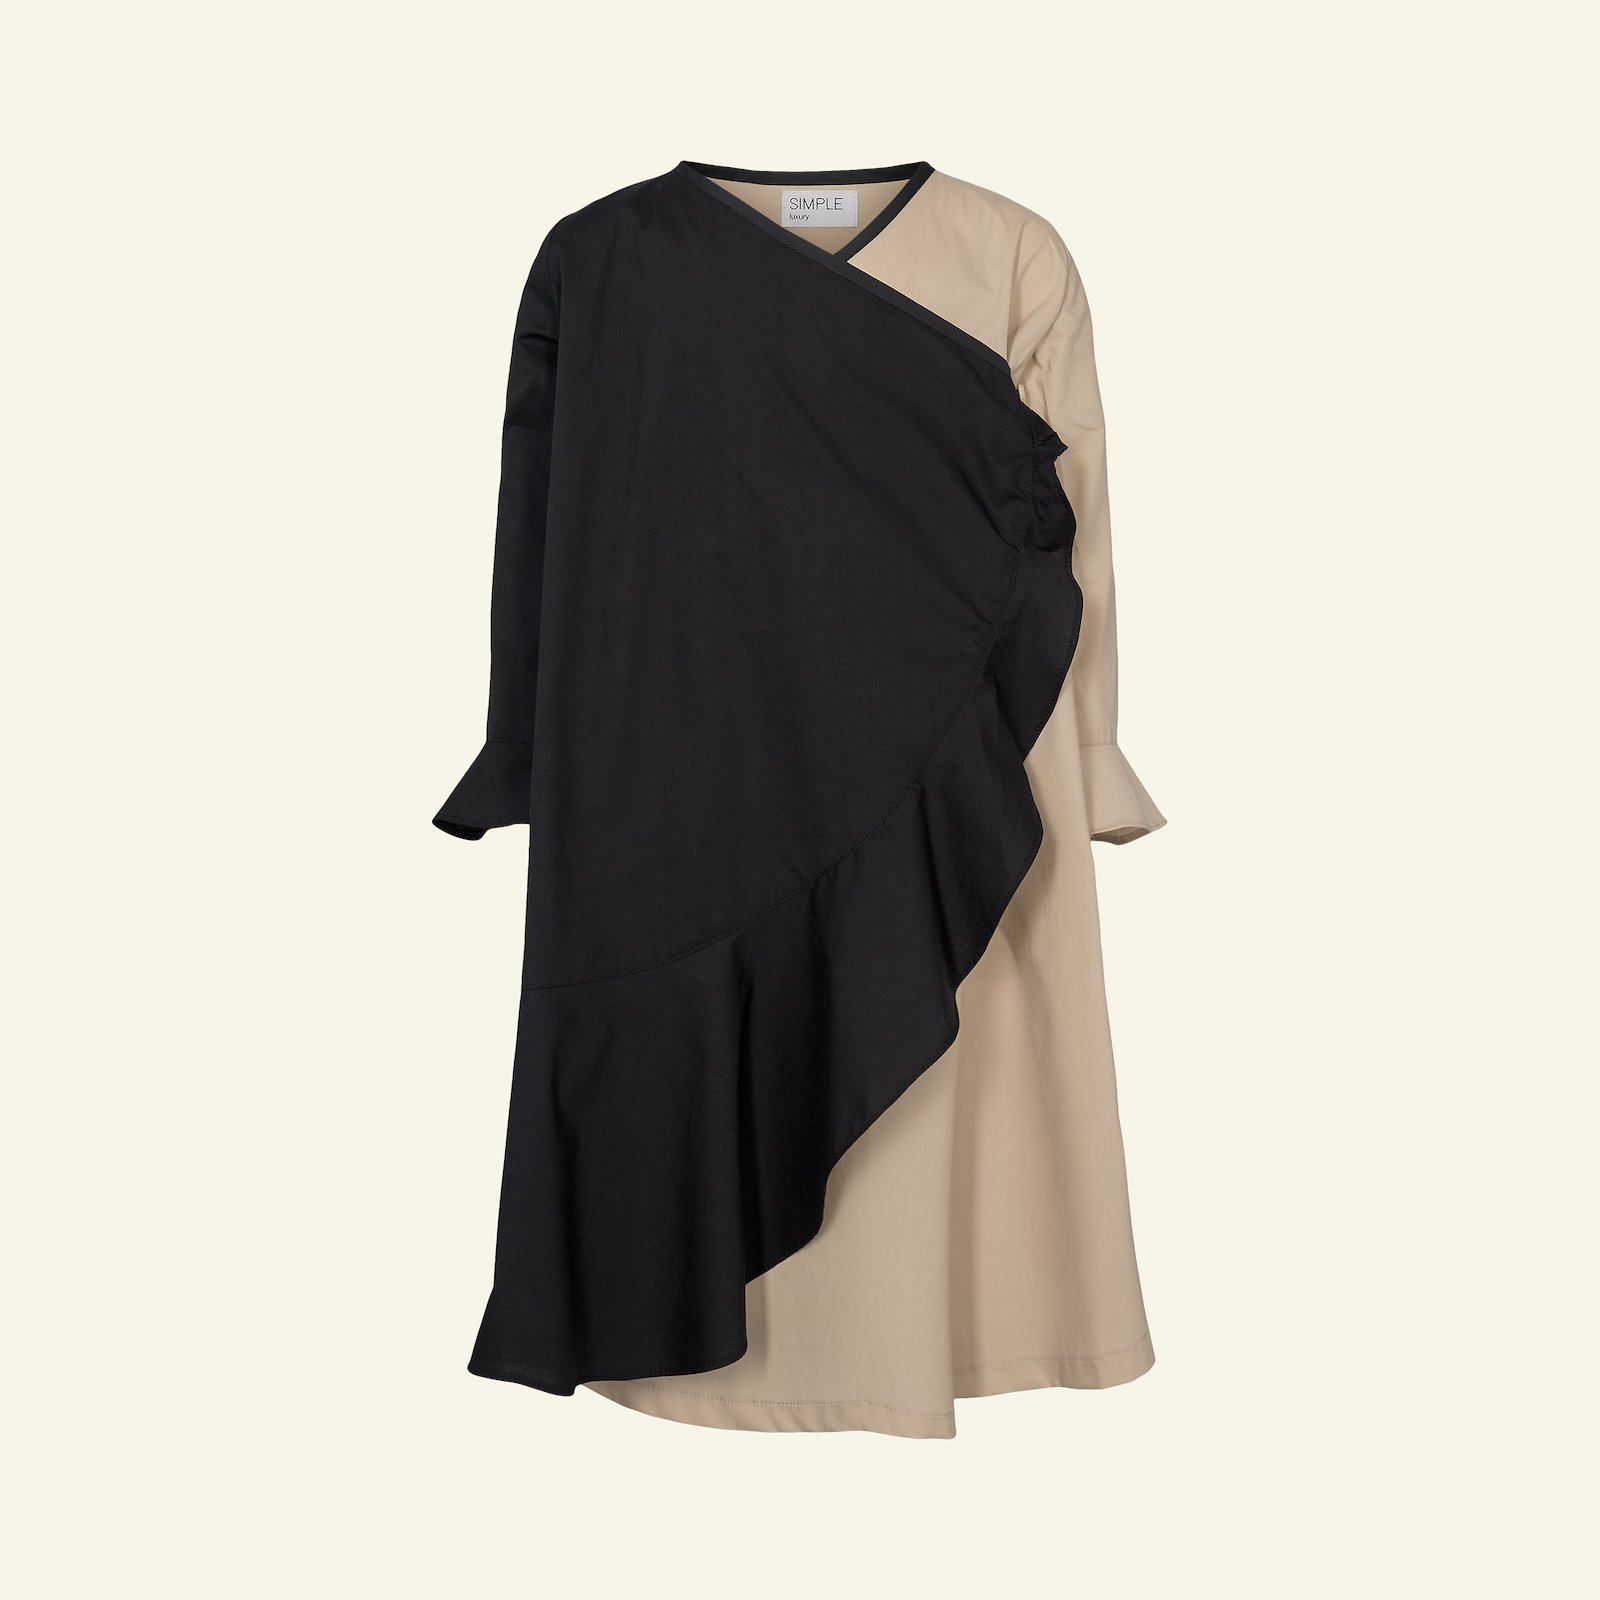 Dress und blouse with flounce, 110/5y p63066_540110_510112_64080_24865_sskit